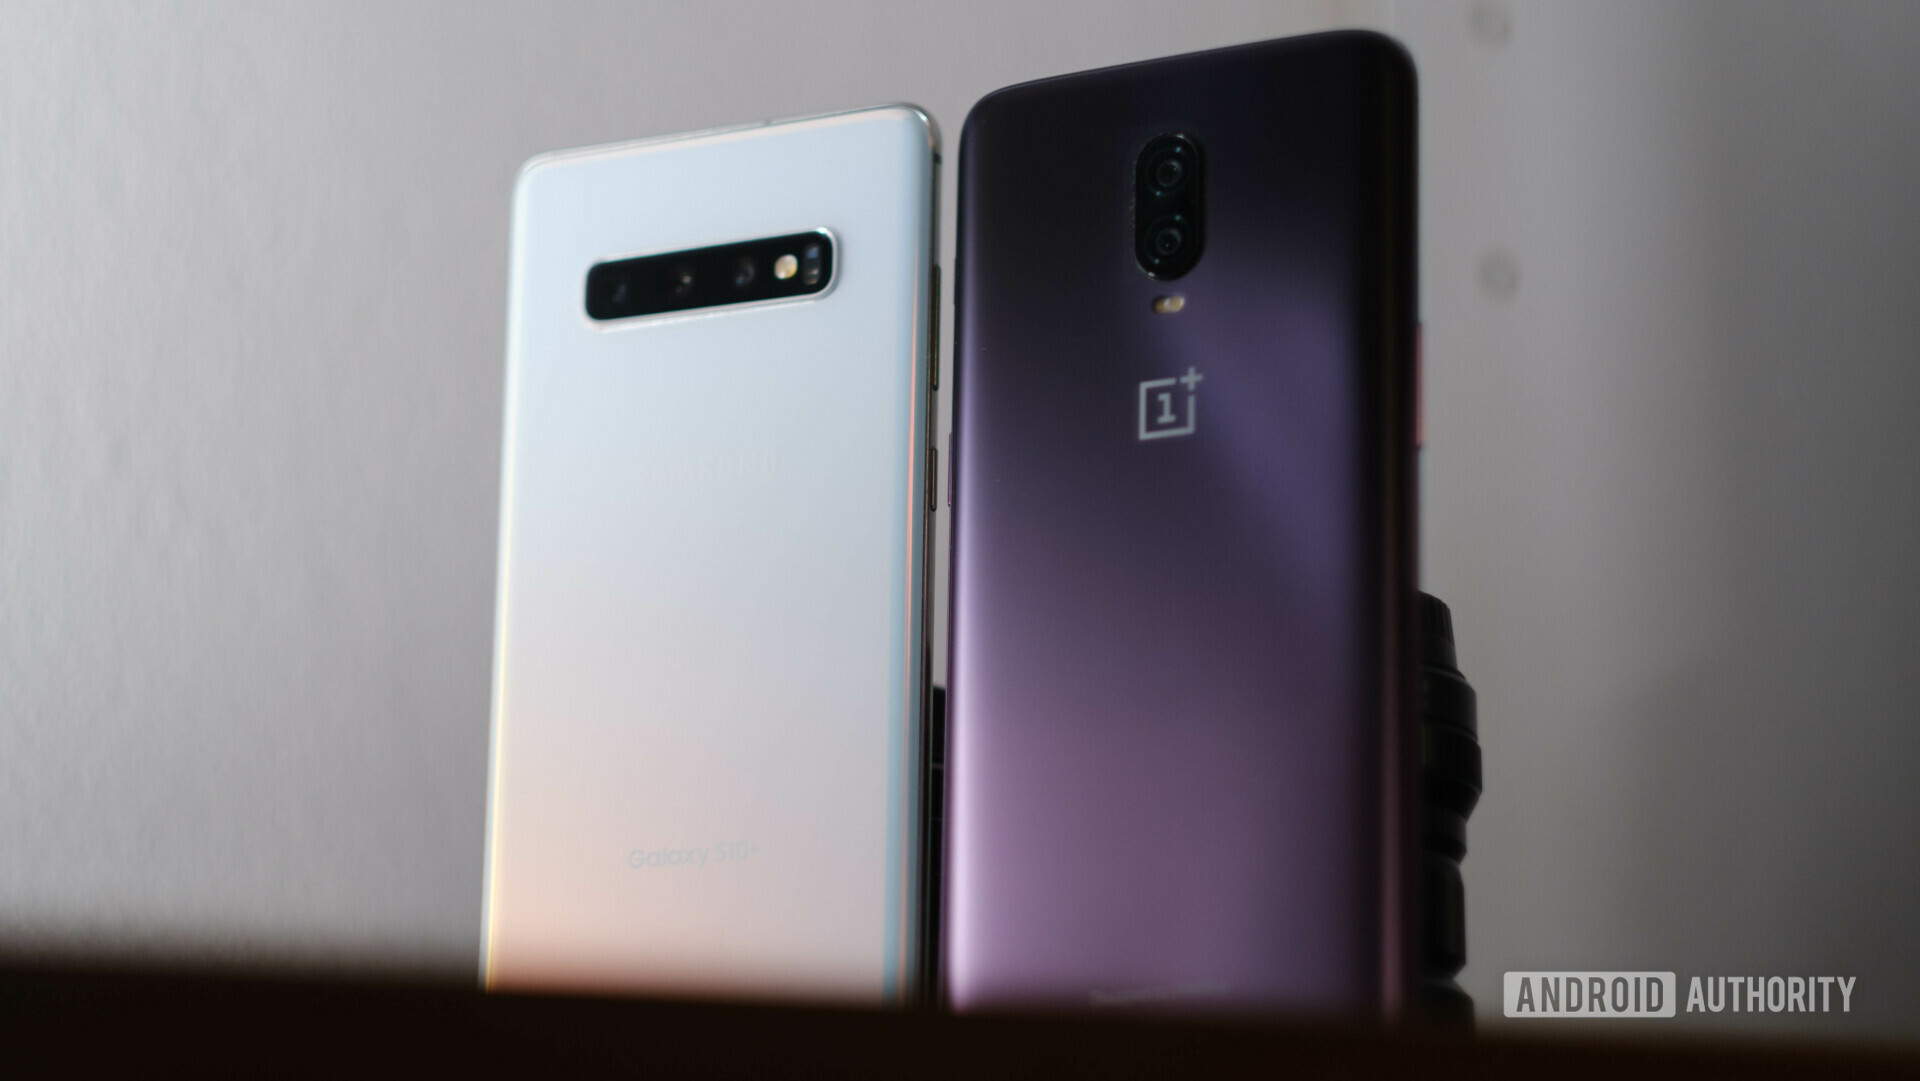 Samsung Galaxy S10 Plus vs OnePlus 6T at an angle